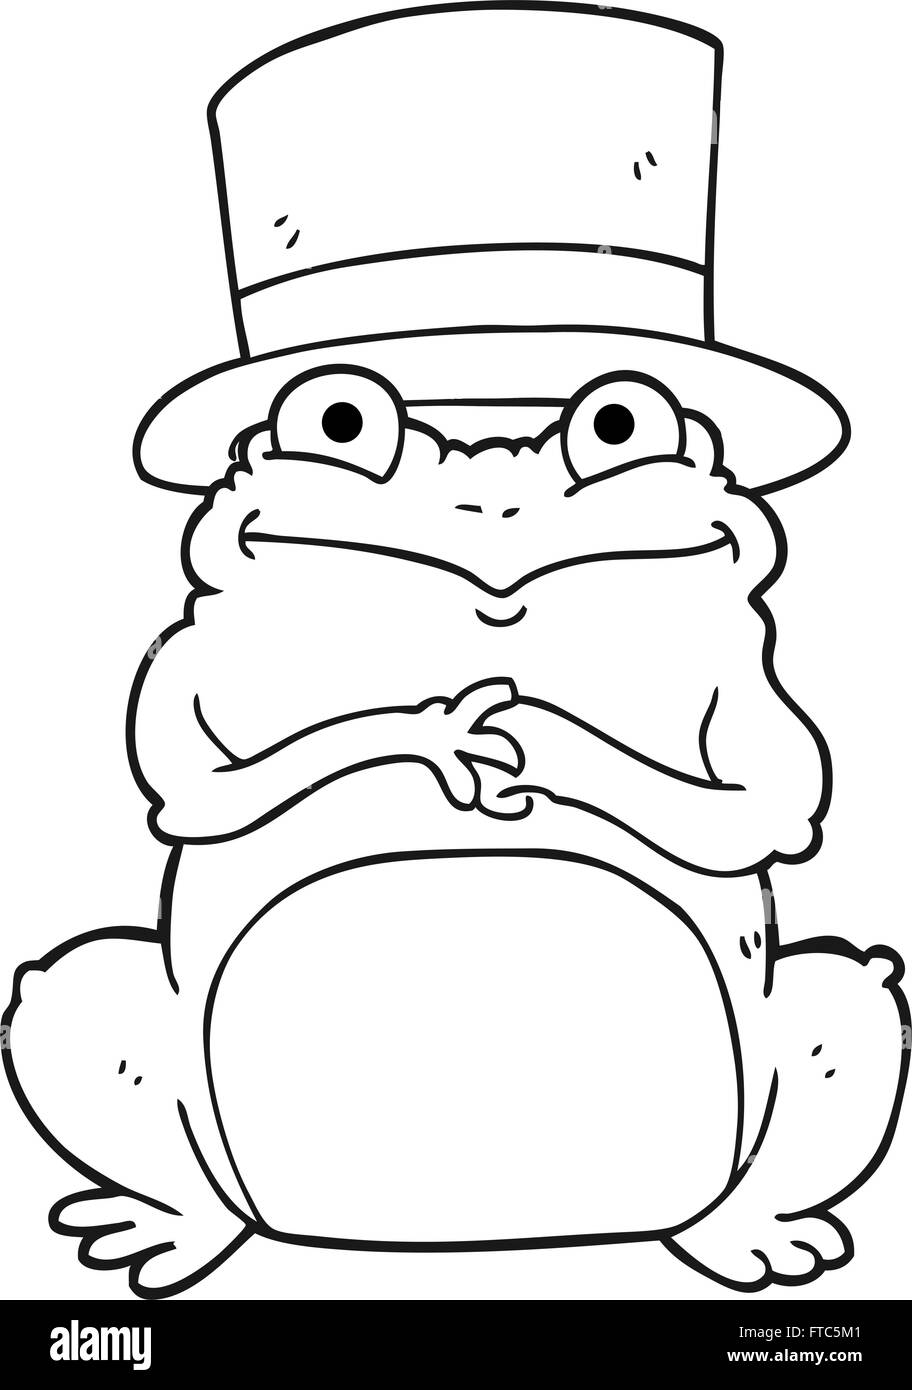 freehand drawn black and white cartoon frog in top hat Stock Vector